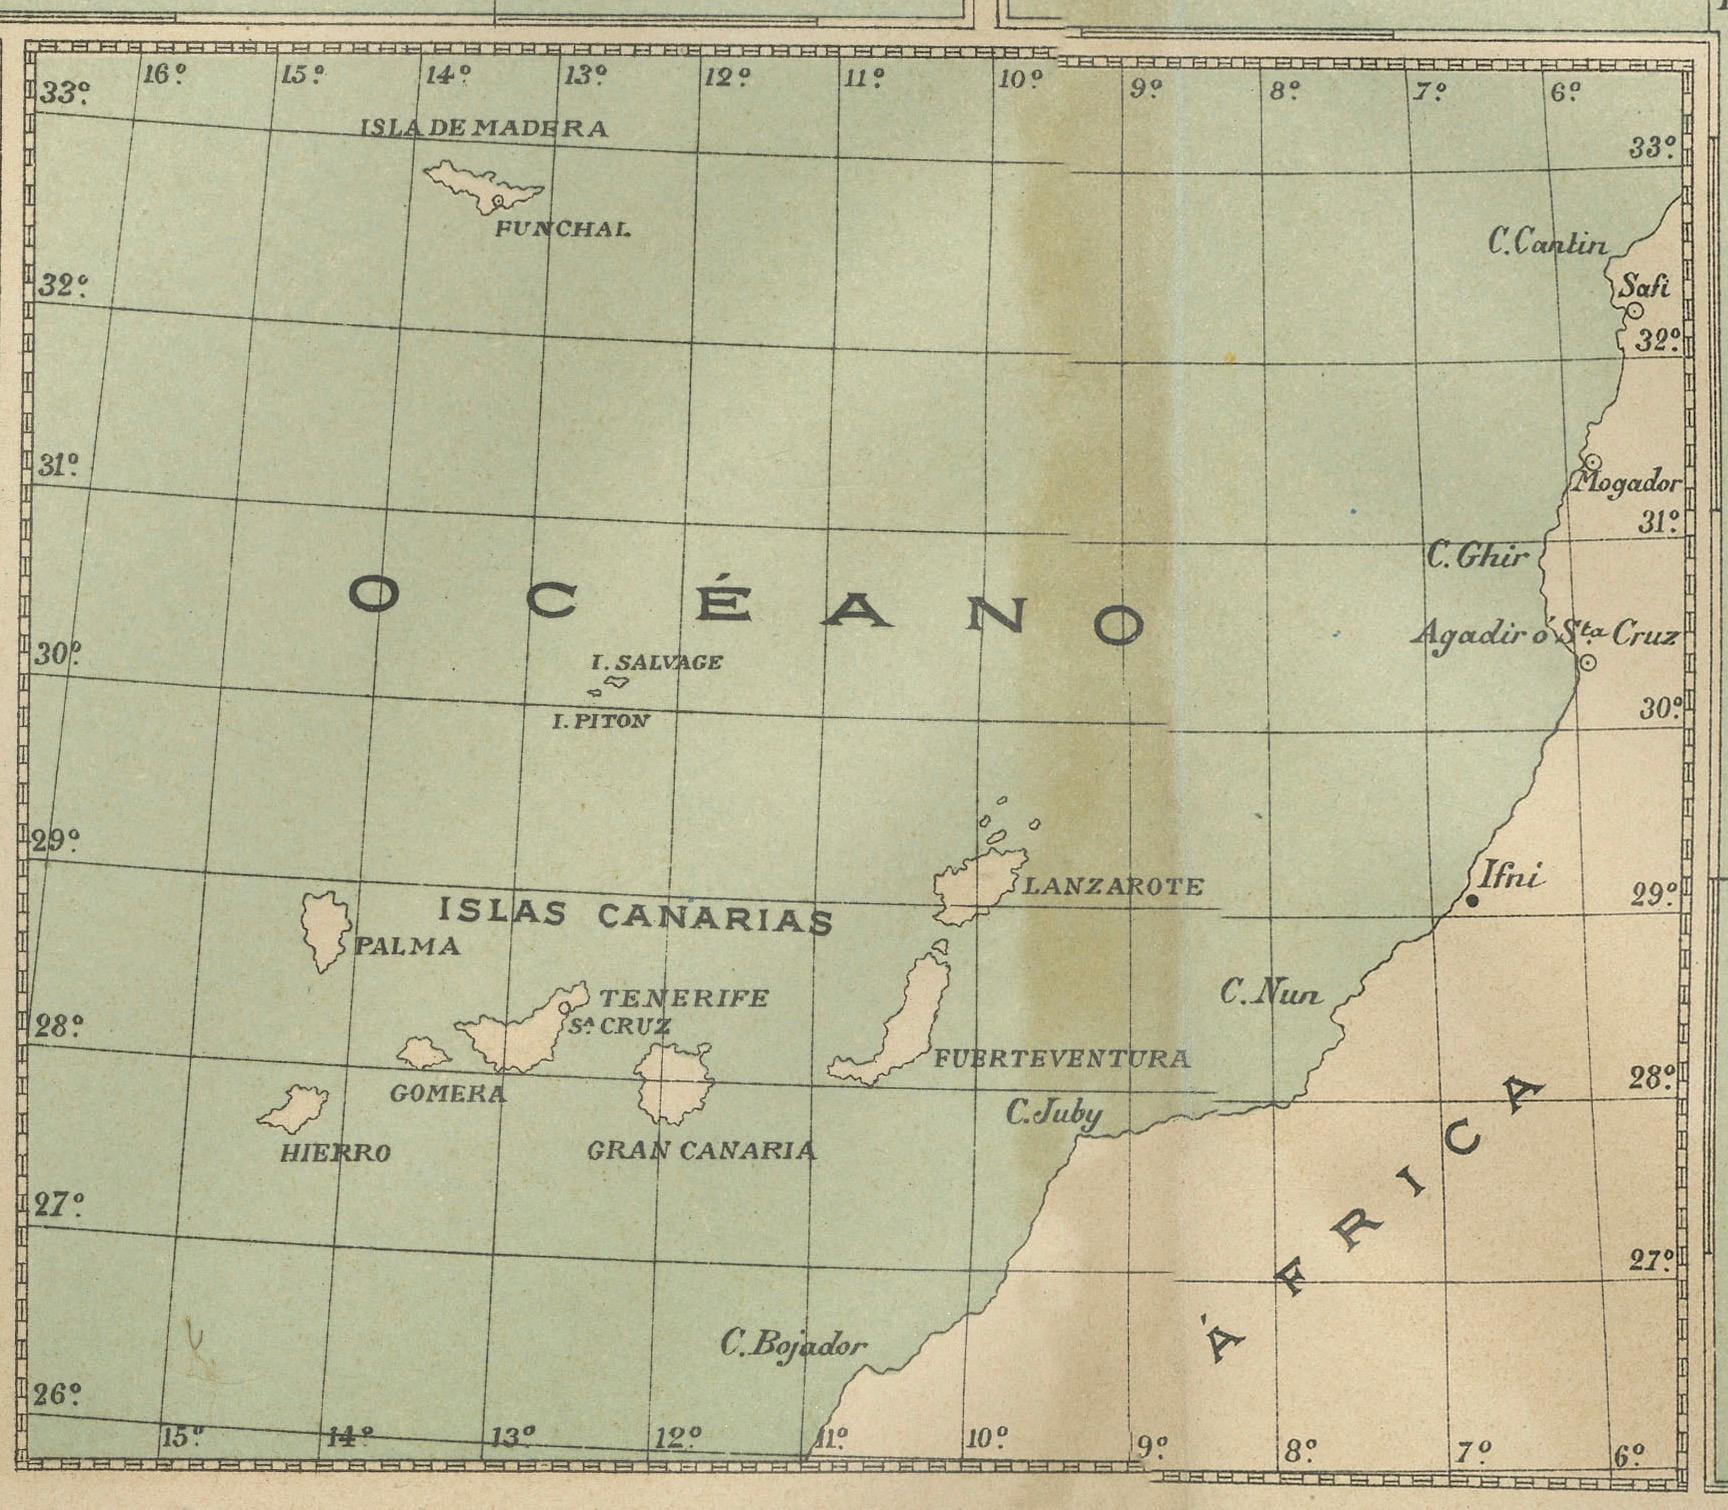 This is a authentic historical map of the Canary Islands, specifically the 